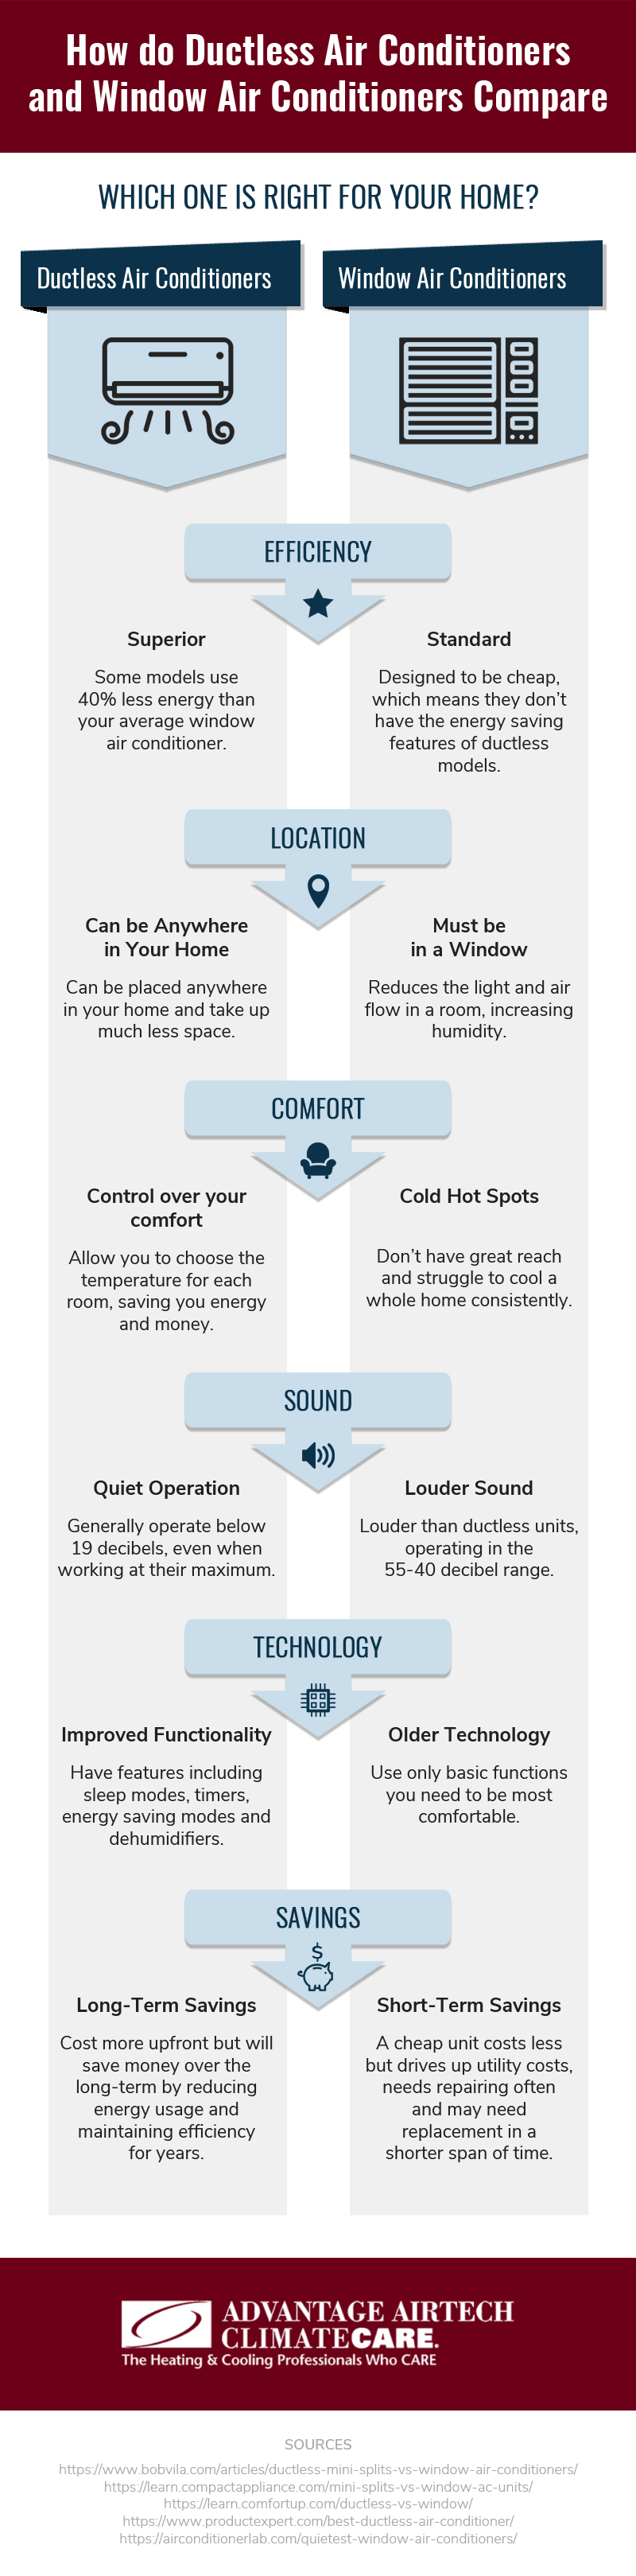 Ductless vs Window Air Conditioners infographic